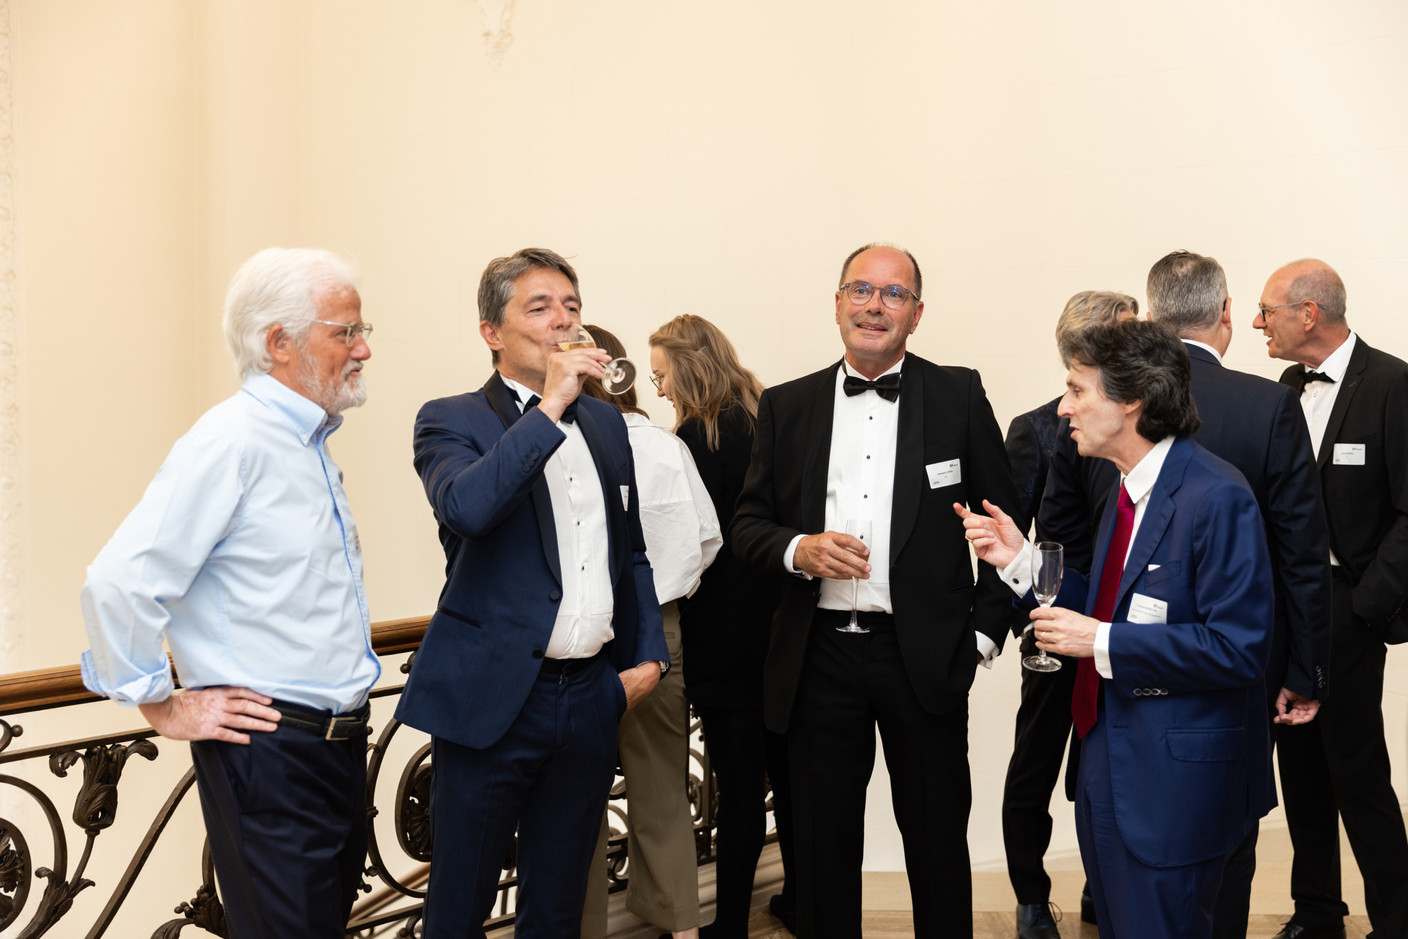 Bernard Lhoest (EY Luxembourg, second from left), Jacques Linon (EY Luxembourg, second from right), Lorenzo Modestini (Euromobiliare Asset Management, right) at a gala dinner to launch EY Luxembourg's 2023 attractiveness survey, held at the Cercle Cité on 15 June. Photo: Romain Gamba/Maison Moderne